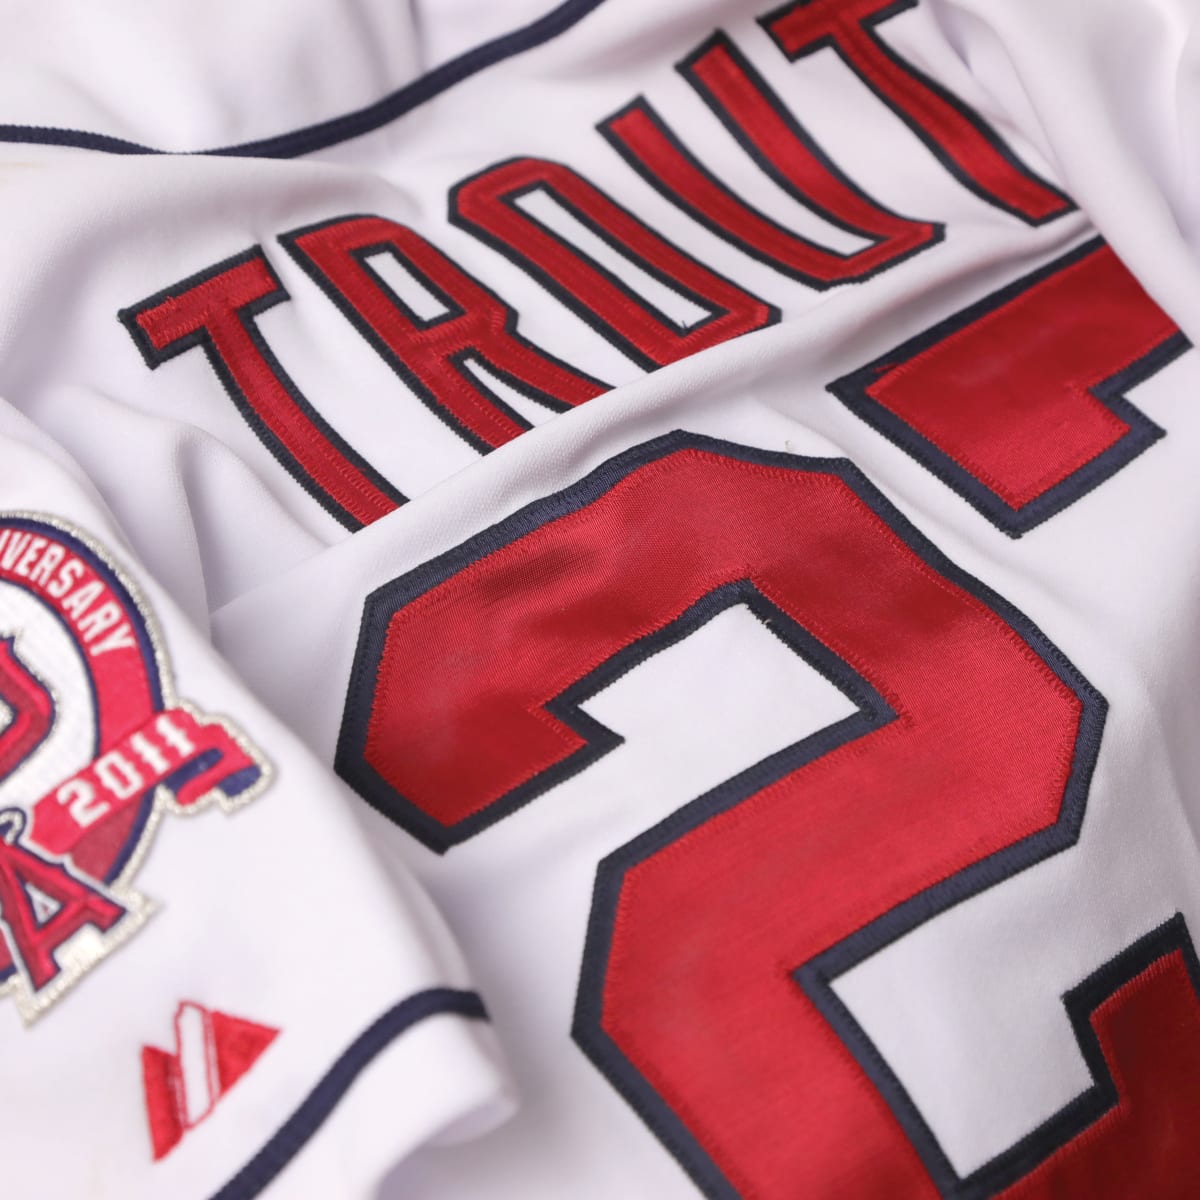 Mike Trout's first MLB jersey among headliners in Lelands auction